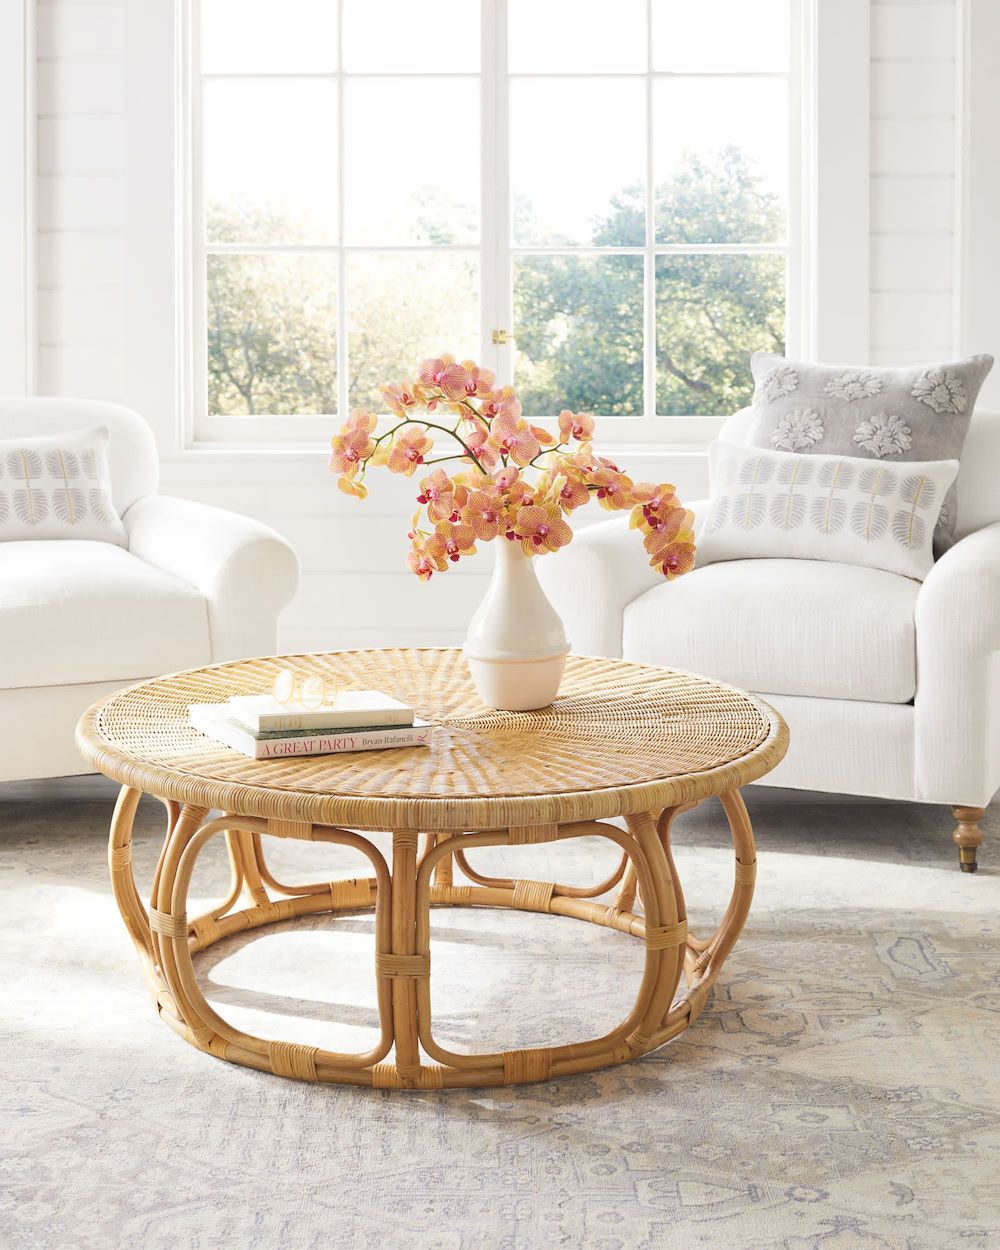 24 Rattan Coffee Tables For The Summer Home With Rattan Coffee Tables (View 6 of 15)